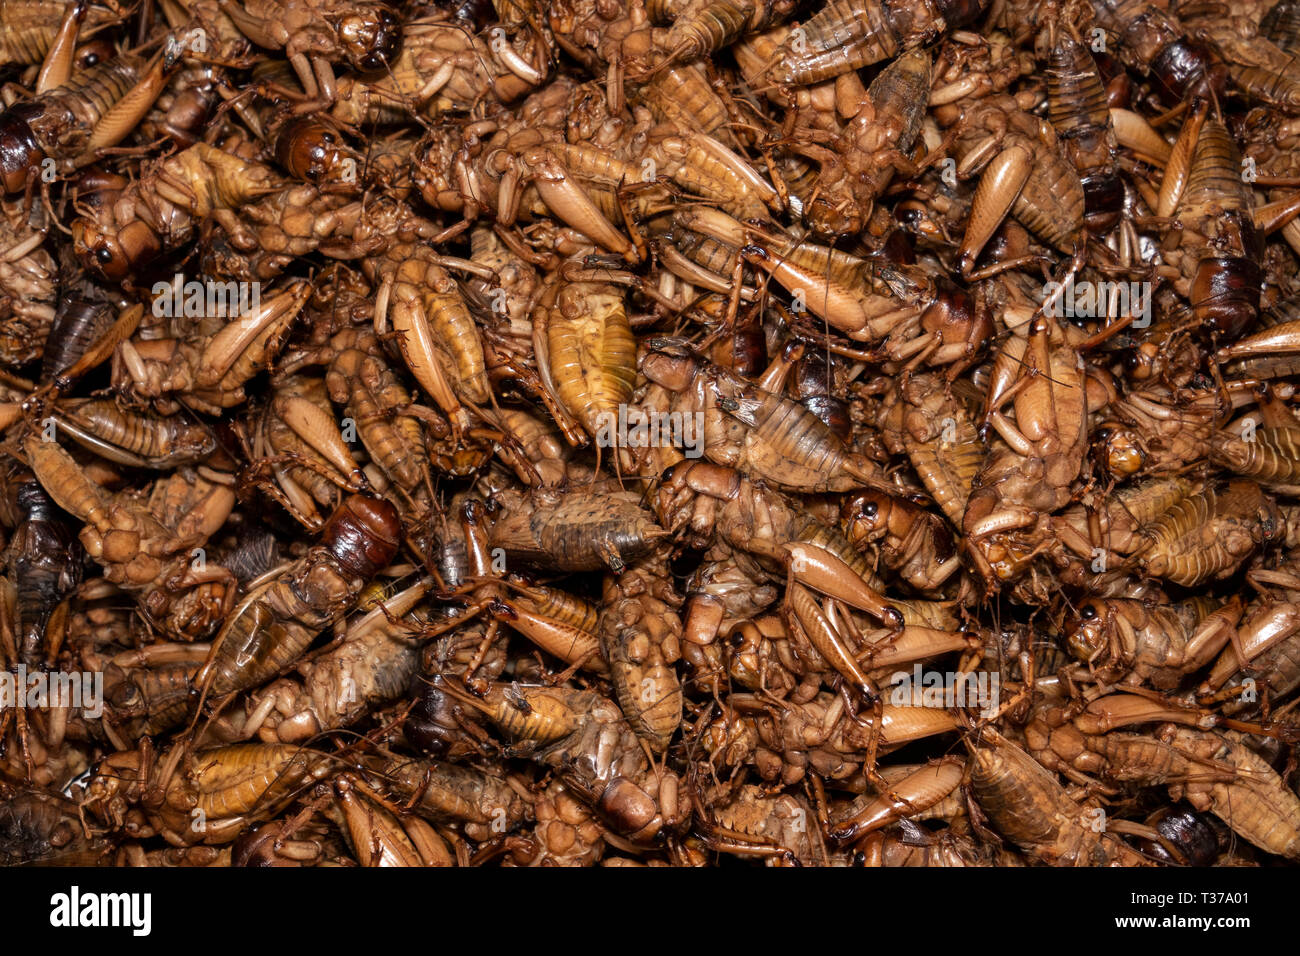 Cambodia, Kampong (Kompong) Cham, town centre, Psar Thmei, central market, cooked locusts for sale as food Stock Photo